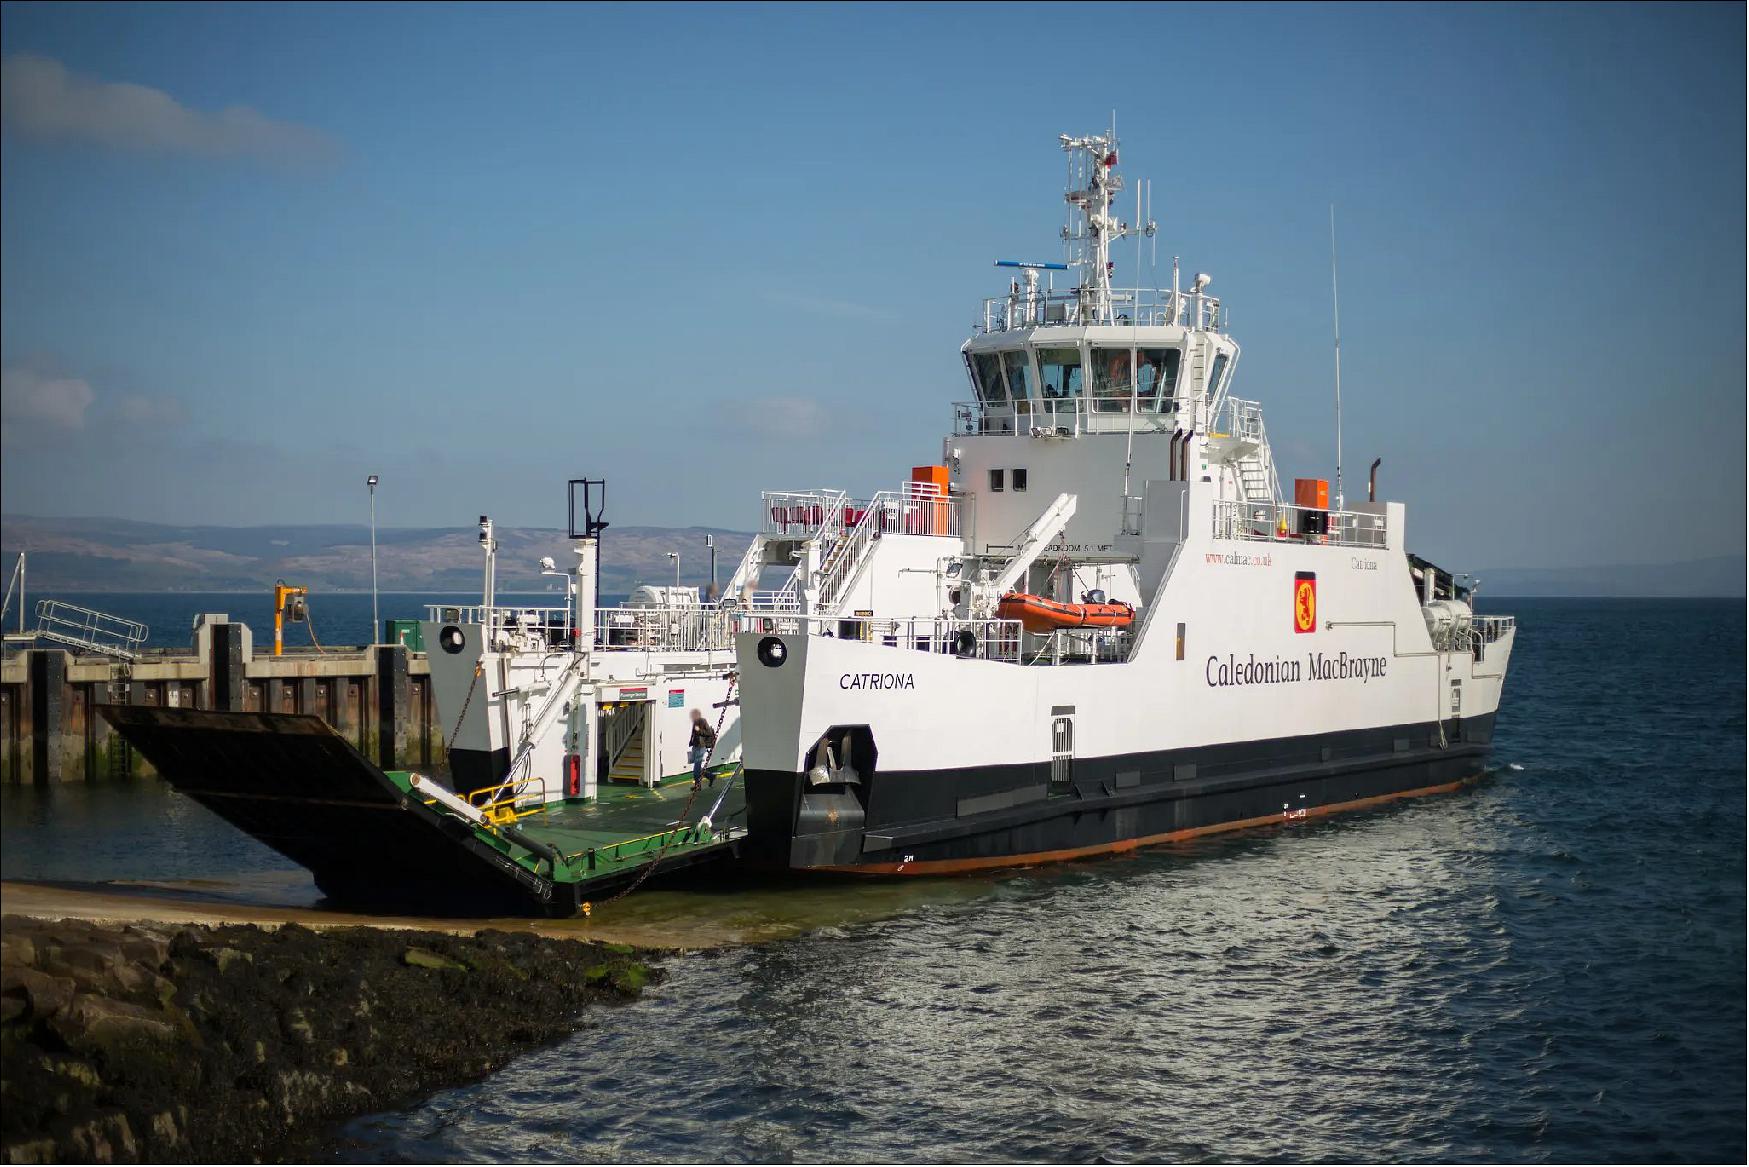 Figure 136: The Catriona, one of three hybrid diesel-electric vessels in CMAL’s fleet and one of the 23 ferries included in this study (image credit: Jeremy Sutton-Hibbert)